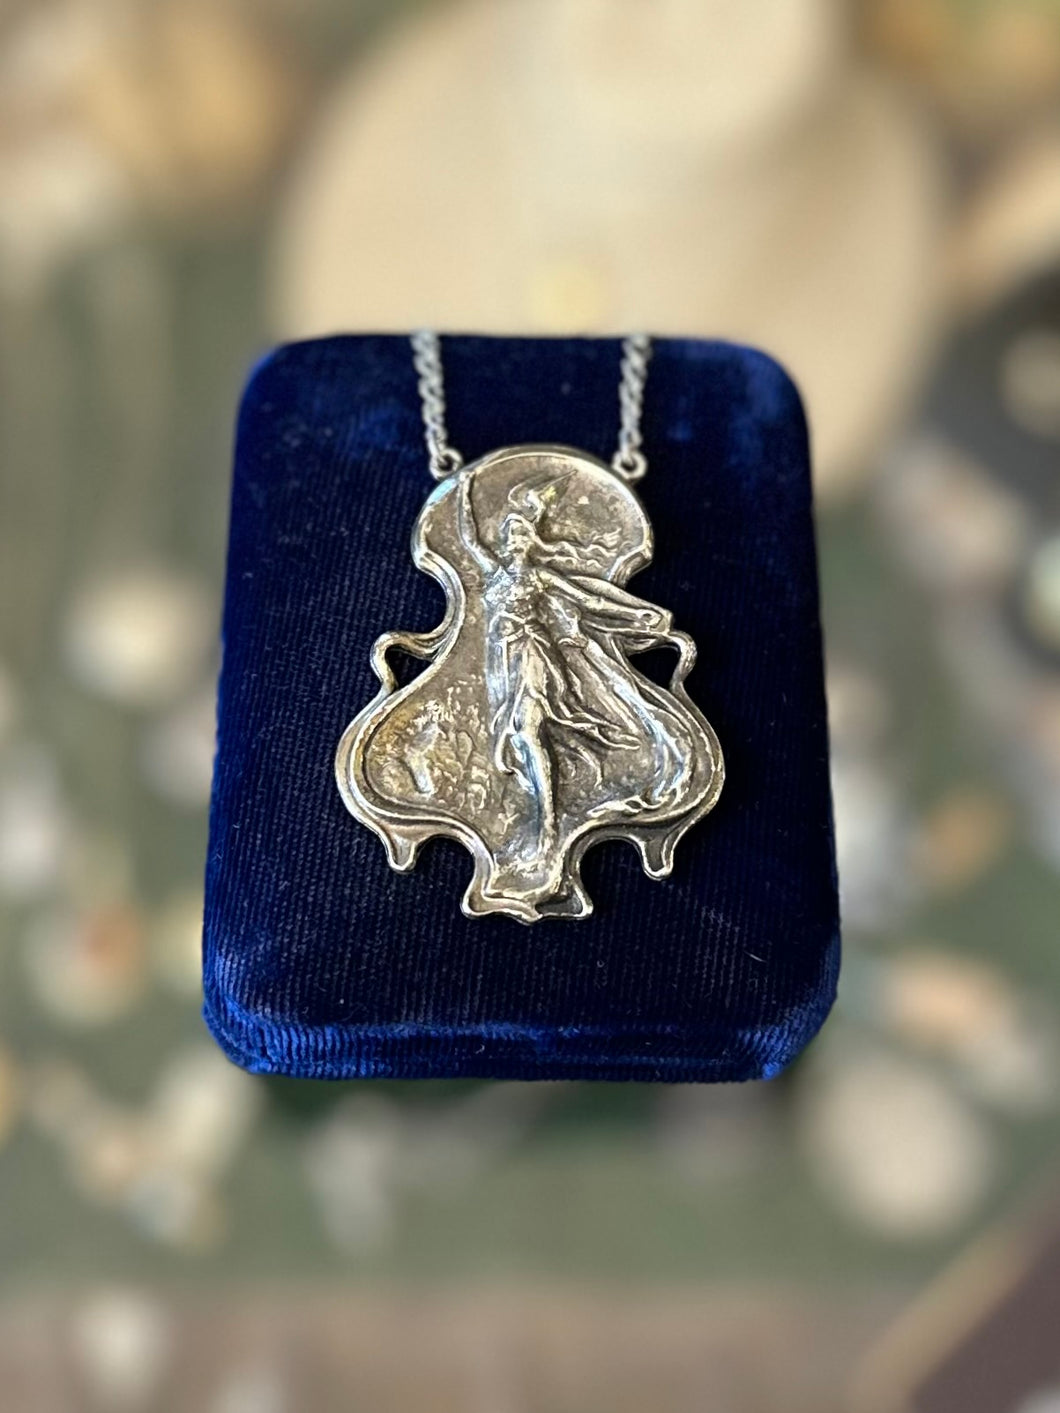 Vintage 1970s Silverplate Casting Pendant Necklace Winged Helmet Goddess Silver Tone Chain 15.5”